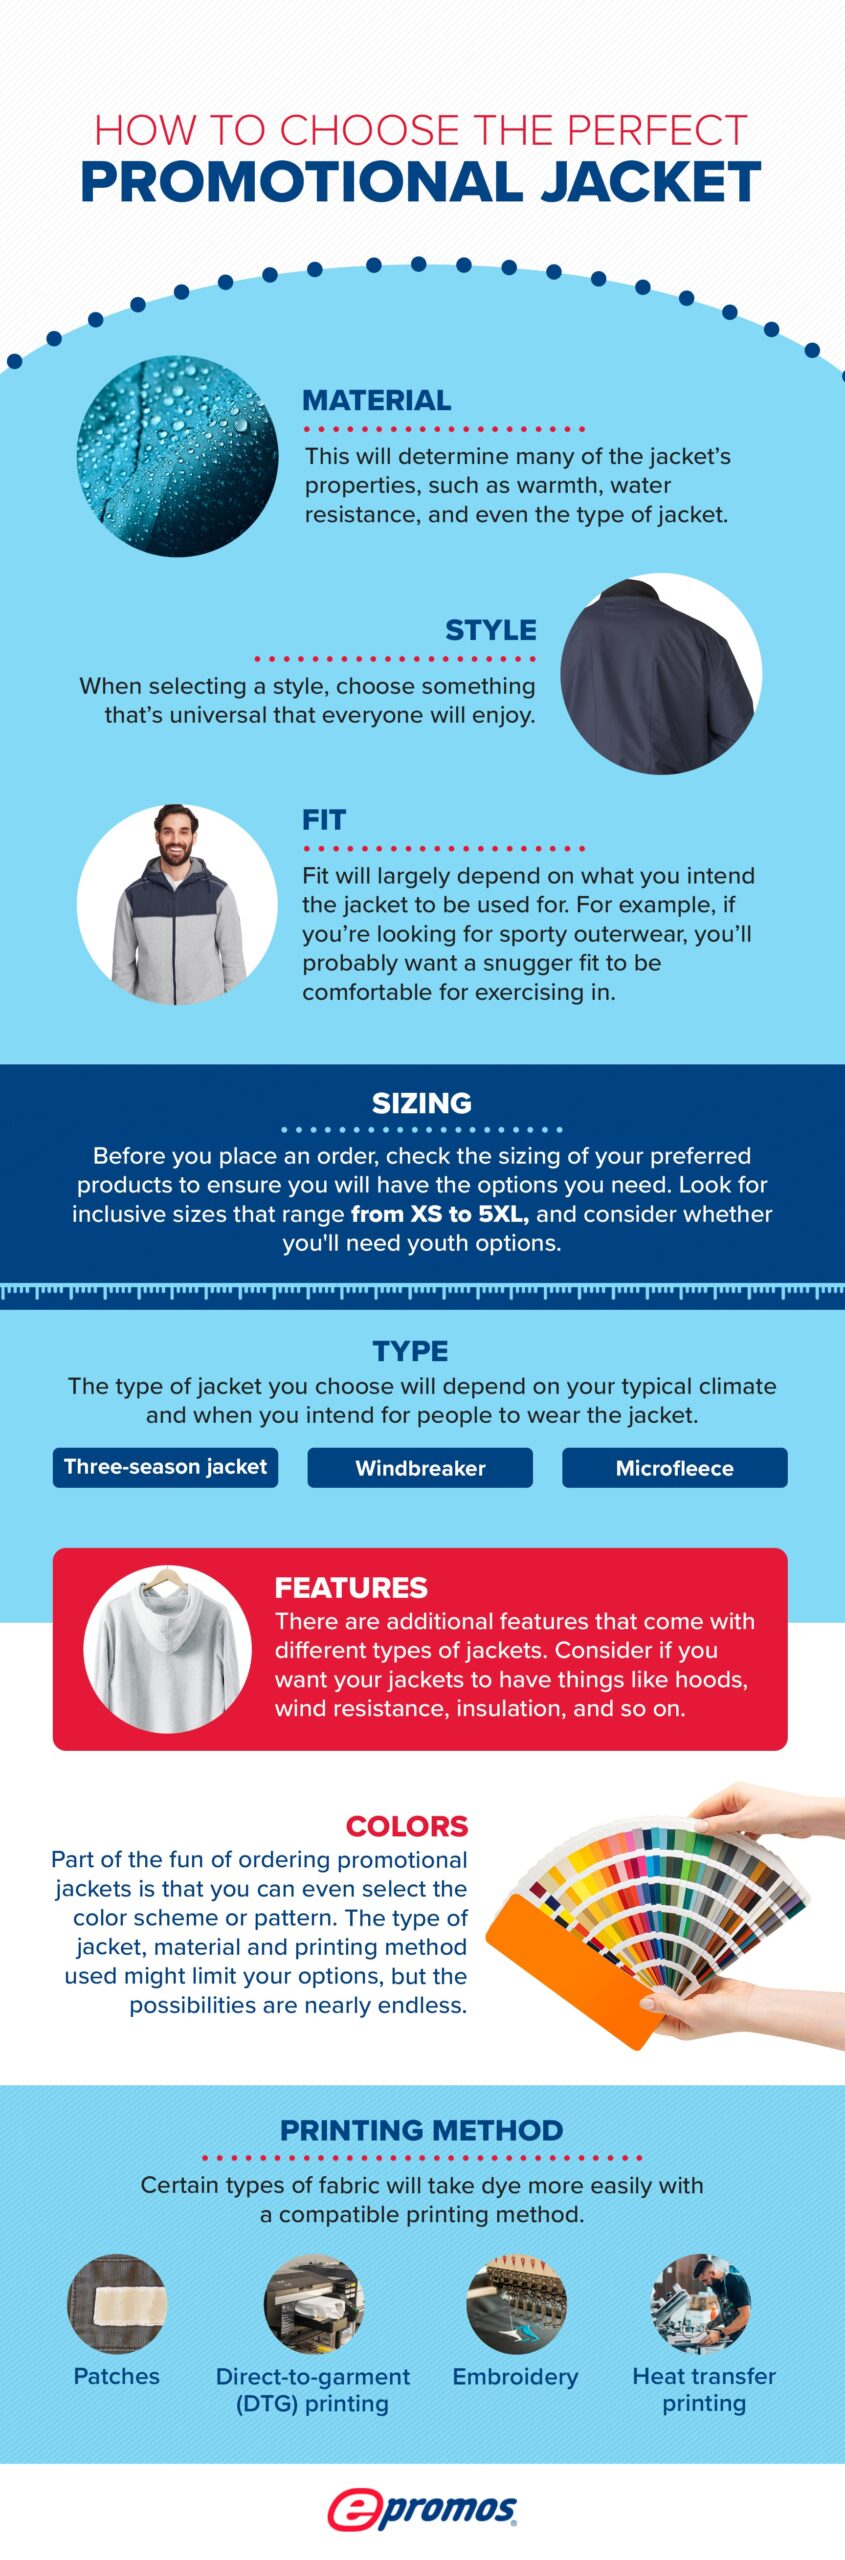 How-to-Choose-the-Perfect-Promotional-Jacket-